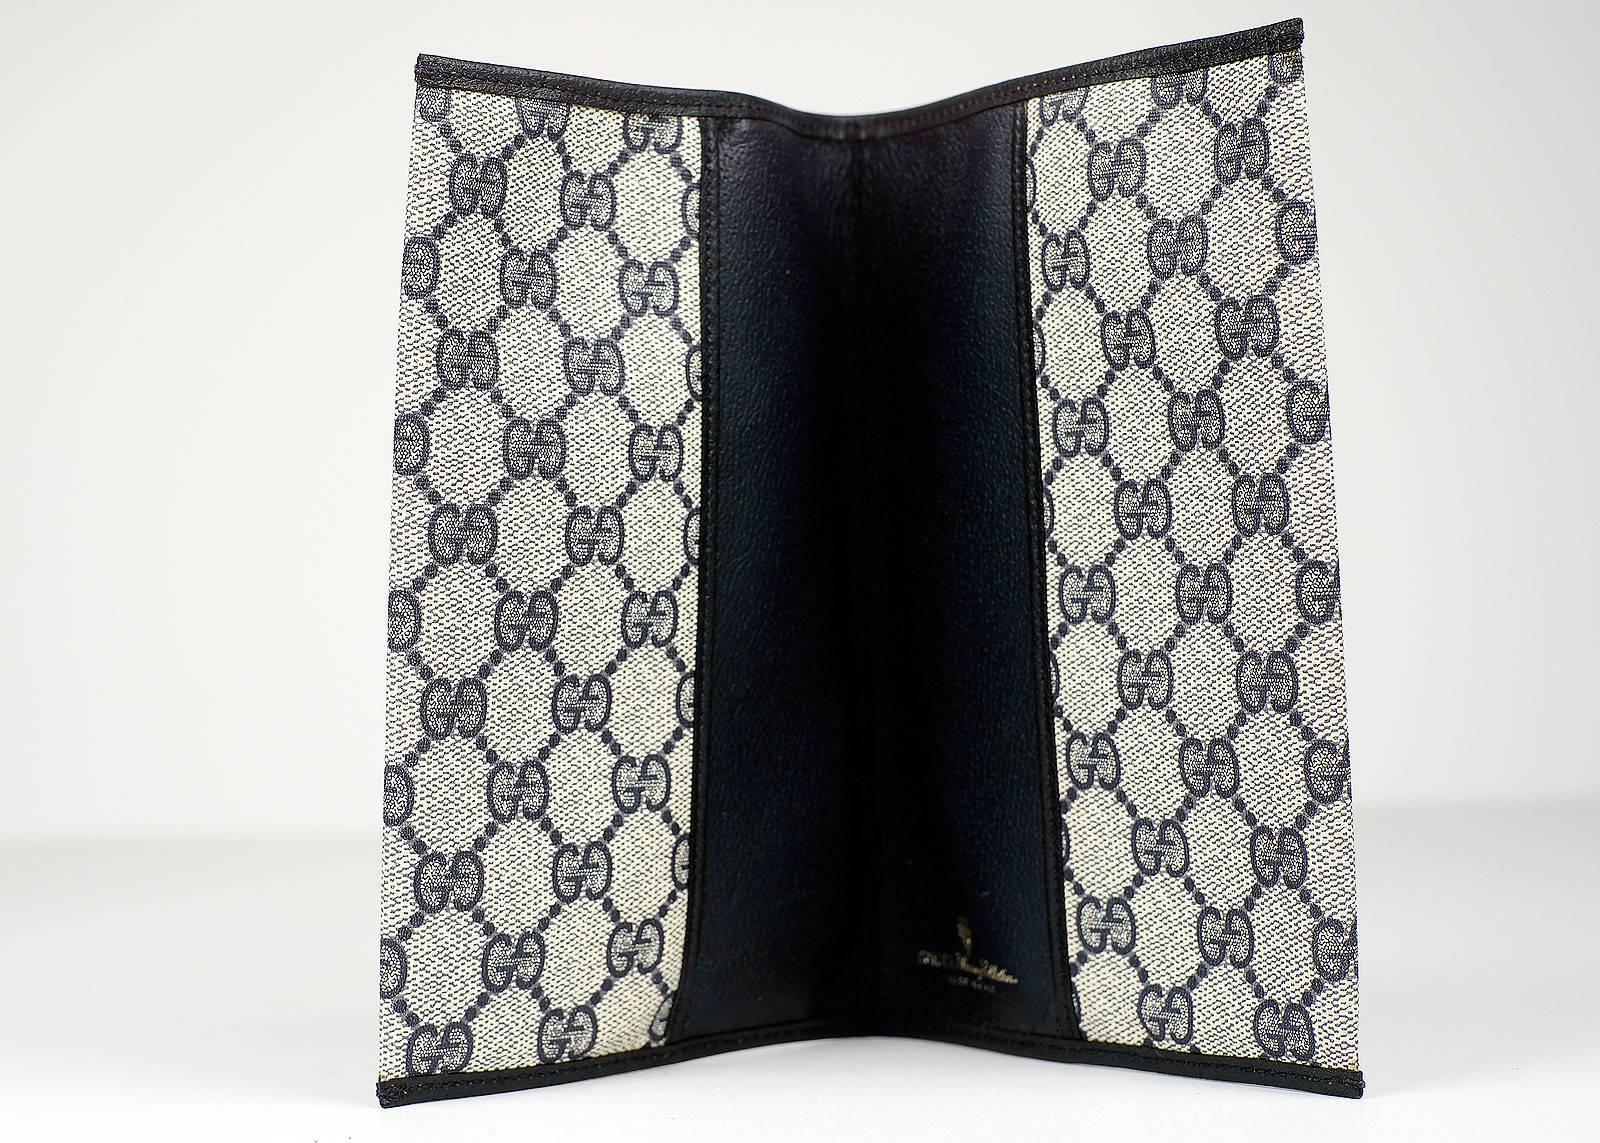 Gucci Anniversary Collection white and black double G patterned TV guide holder. 

Measurements: 7.5 inches long, 5 inches wide

-Measurements-
length: 7.5"
height: 5"

Good Vintage Condition:Please remember all clothes are previously